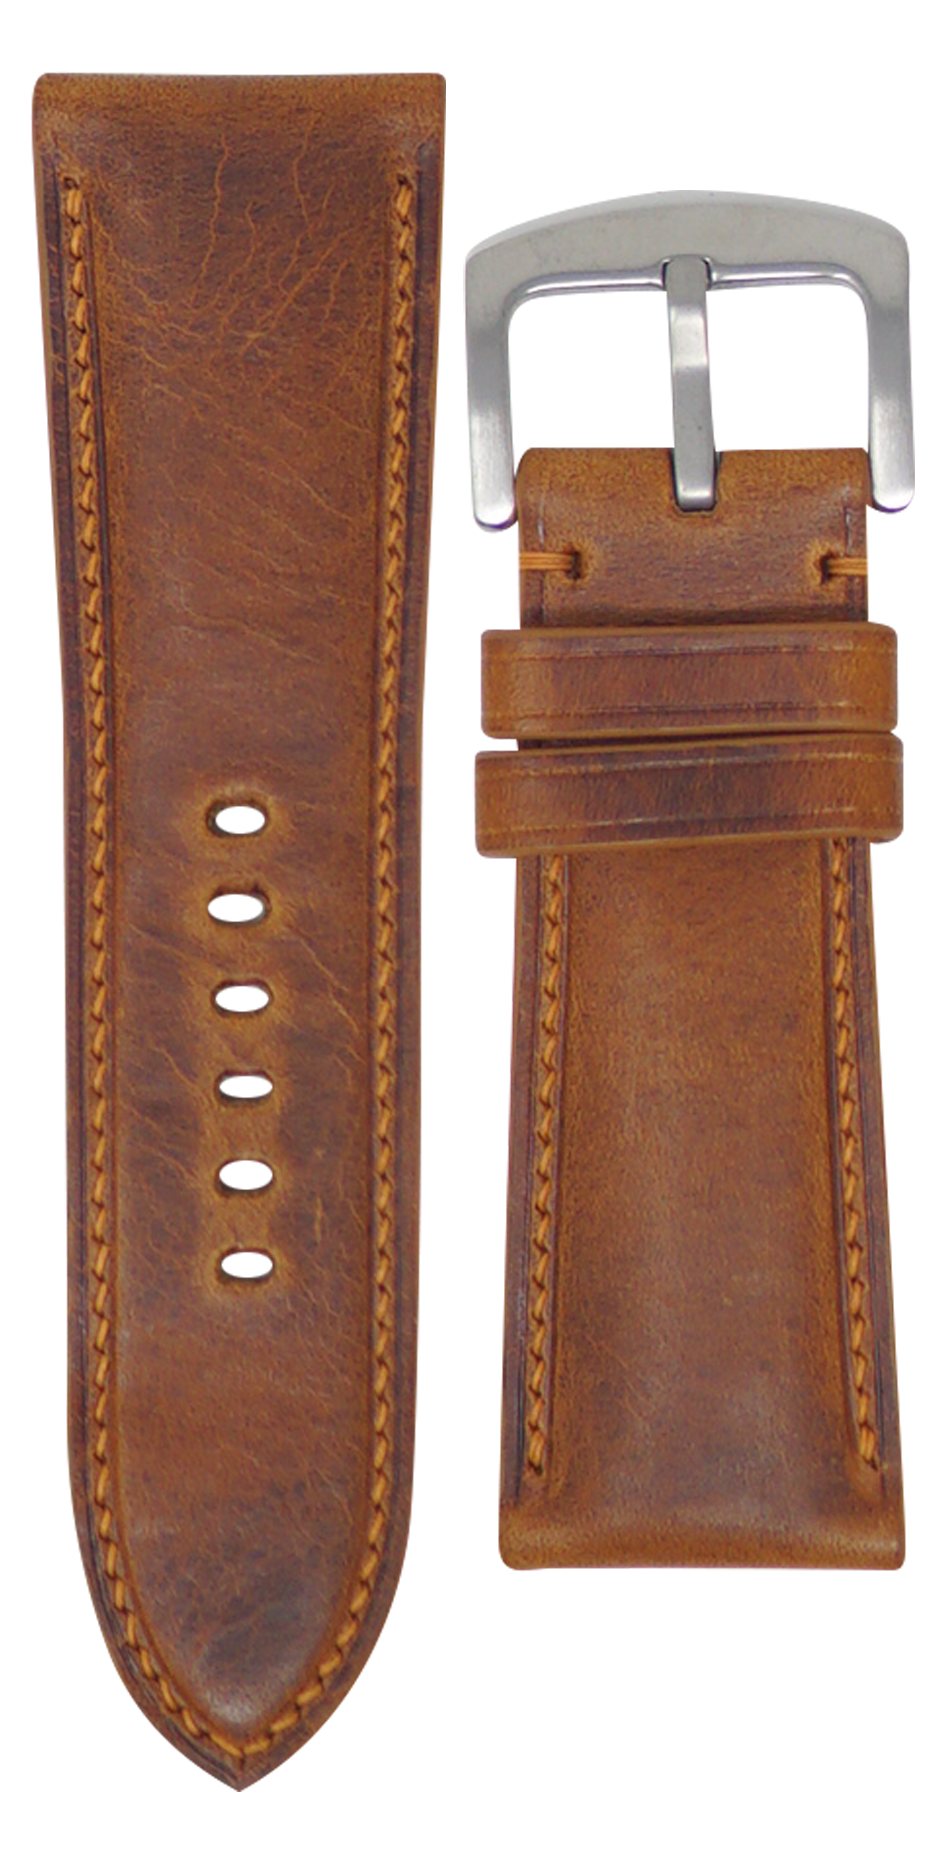 28mm watch strap - quick release